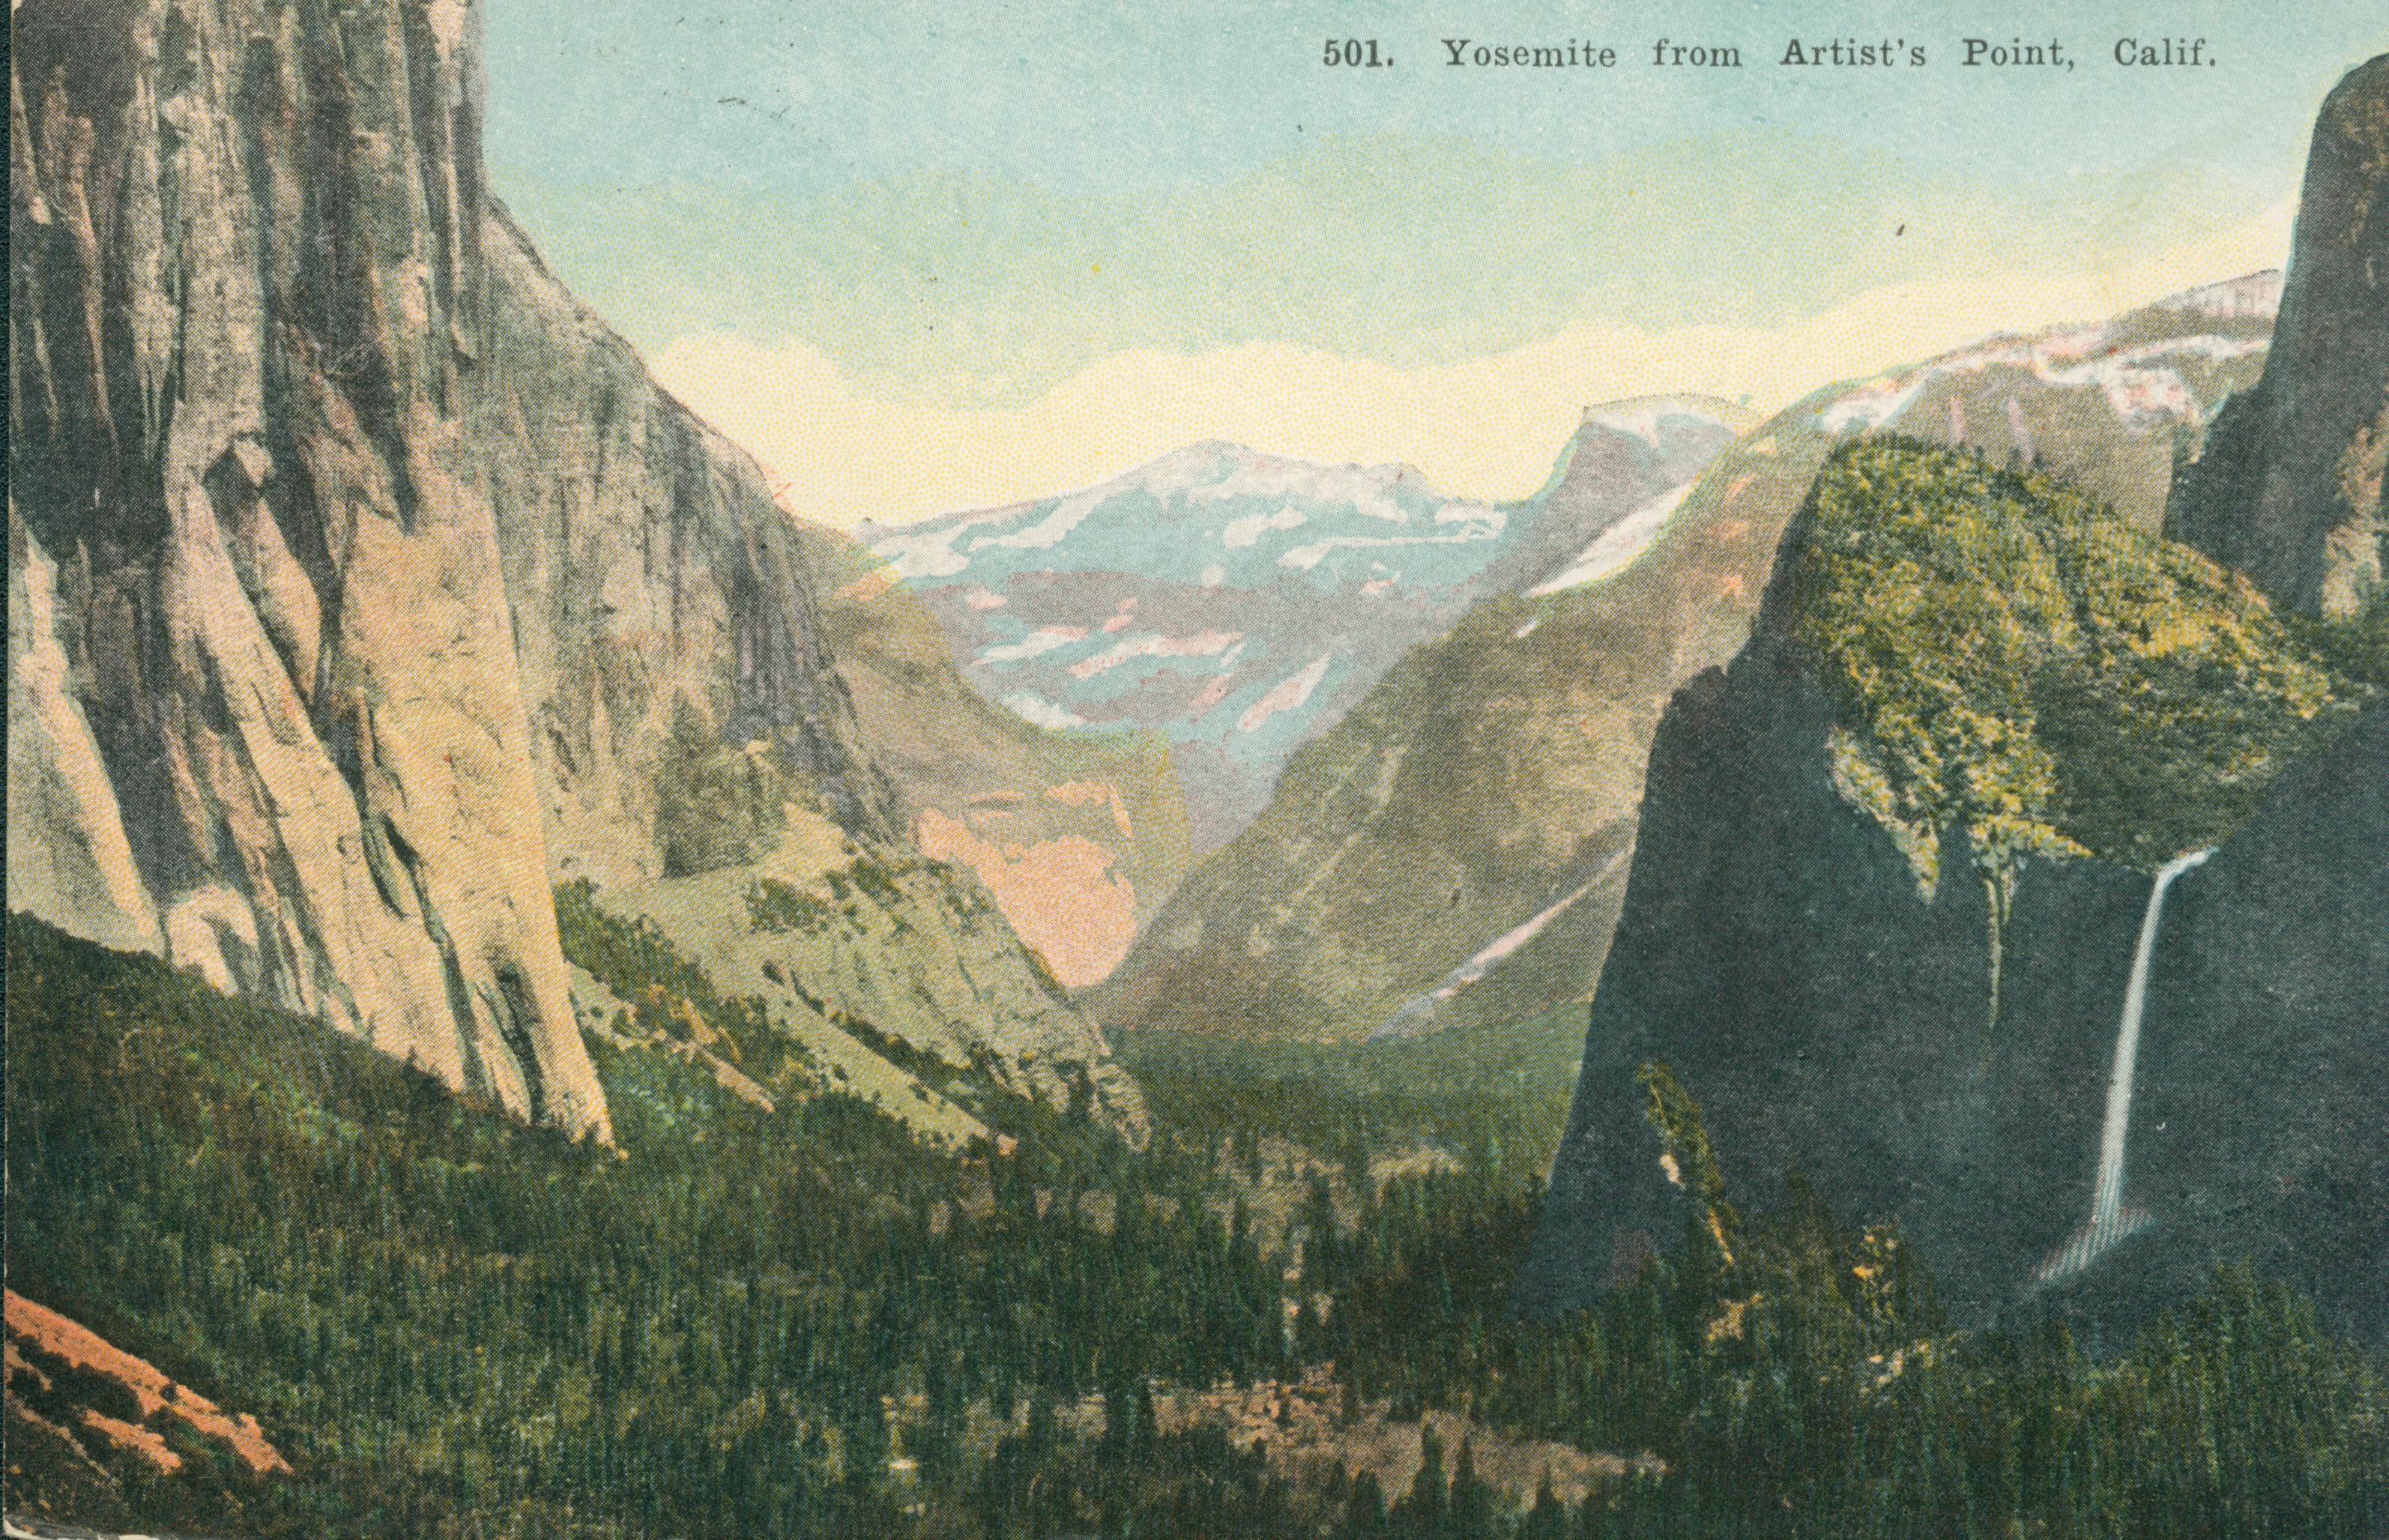 Shows a view of the Yosemite Valley, with a waterfall on the right